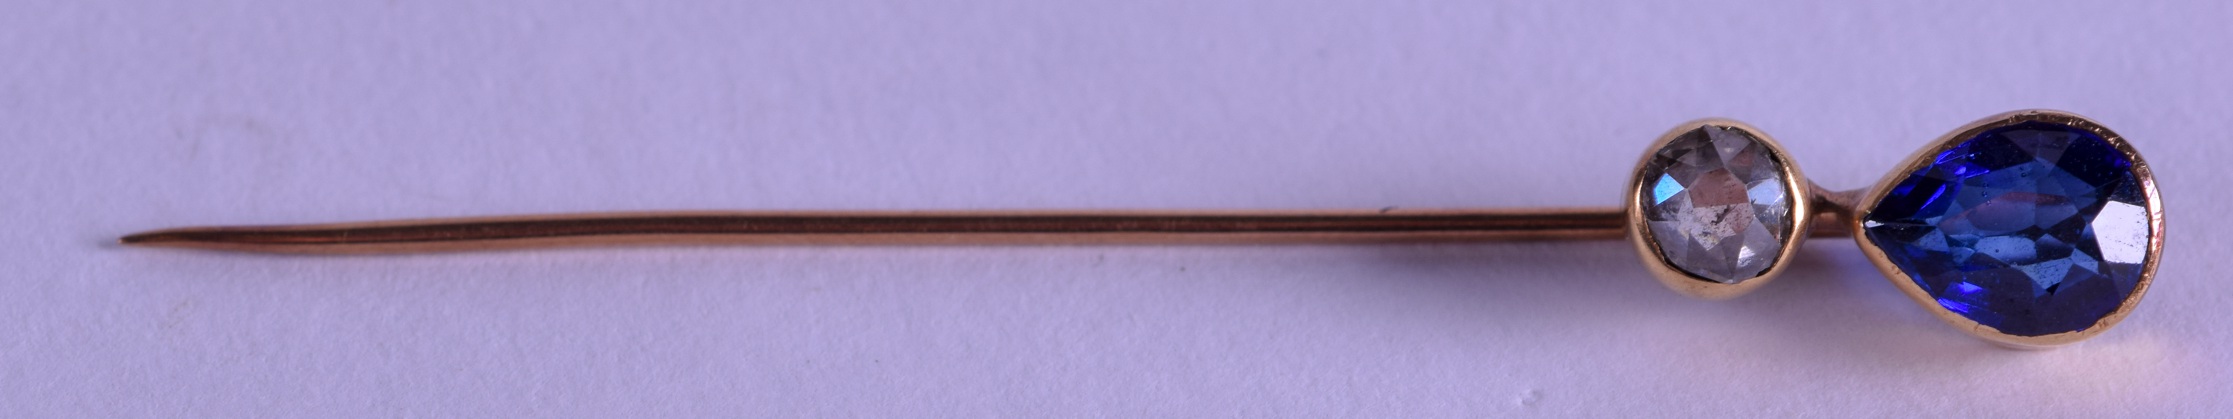 A VICTORIAN GOLD AND SAPPHIRE TIE PIN. 6.75 cm long.